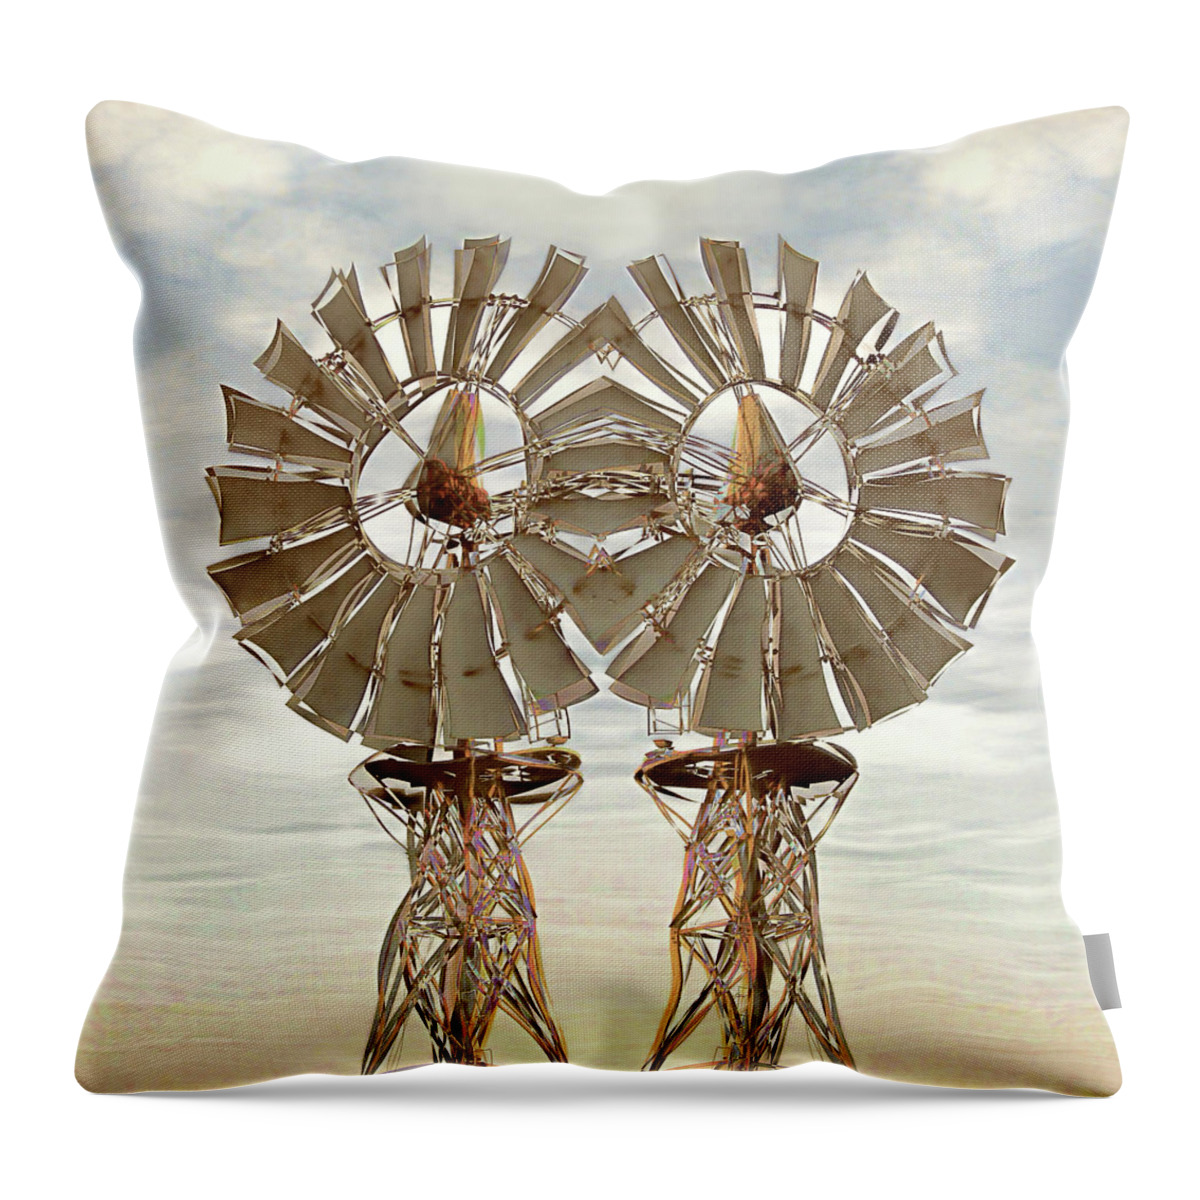 Windmill Throw Pillow featuring the digital art Air Pair by Wendy J St Christopher